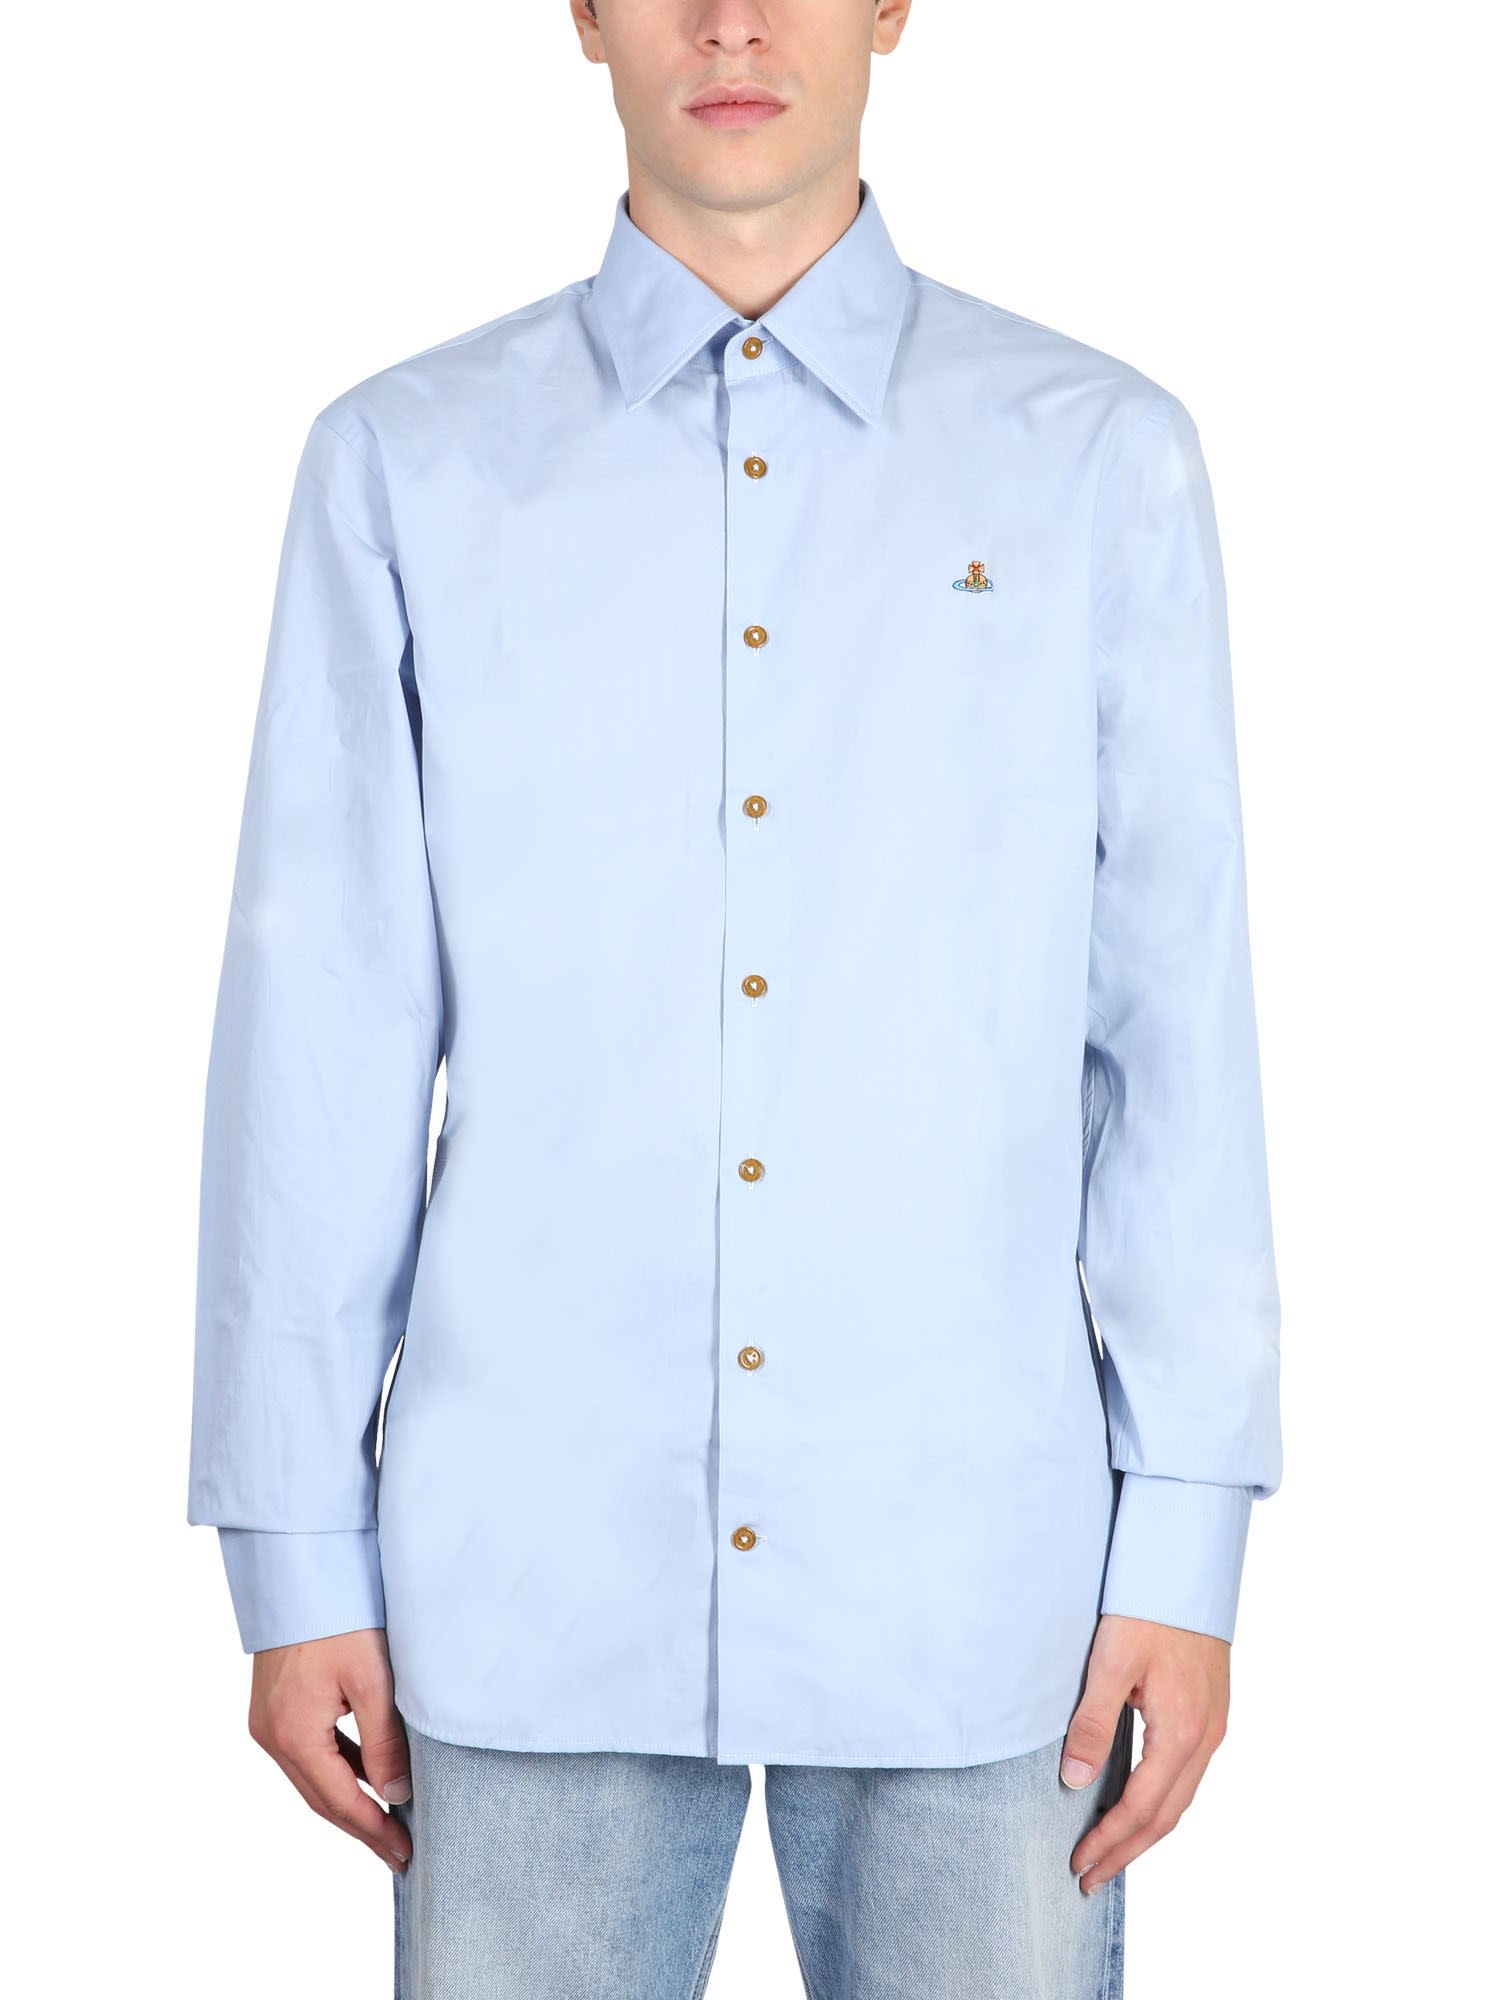 Vivienne Westwood Shirt With Orb Embroidery